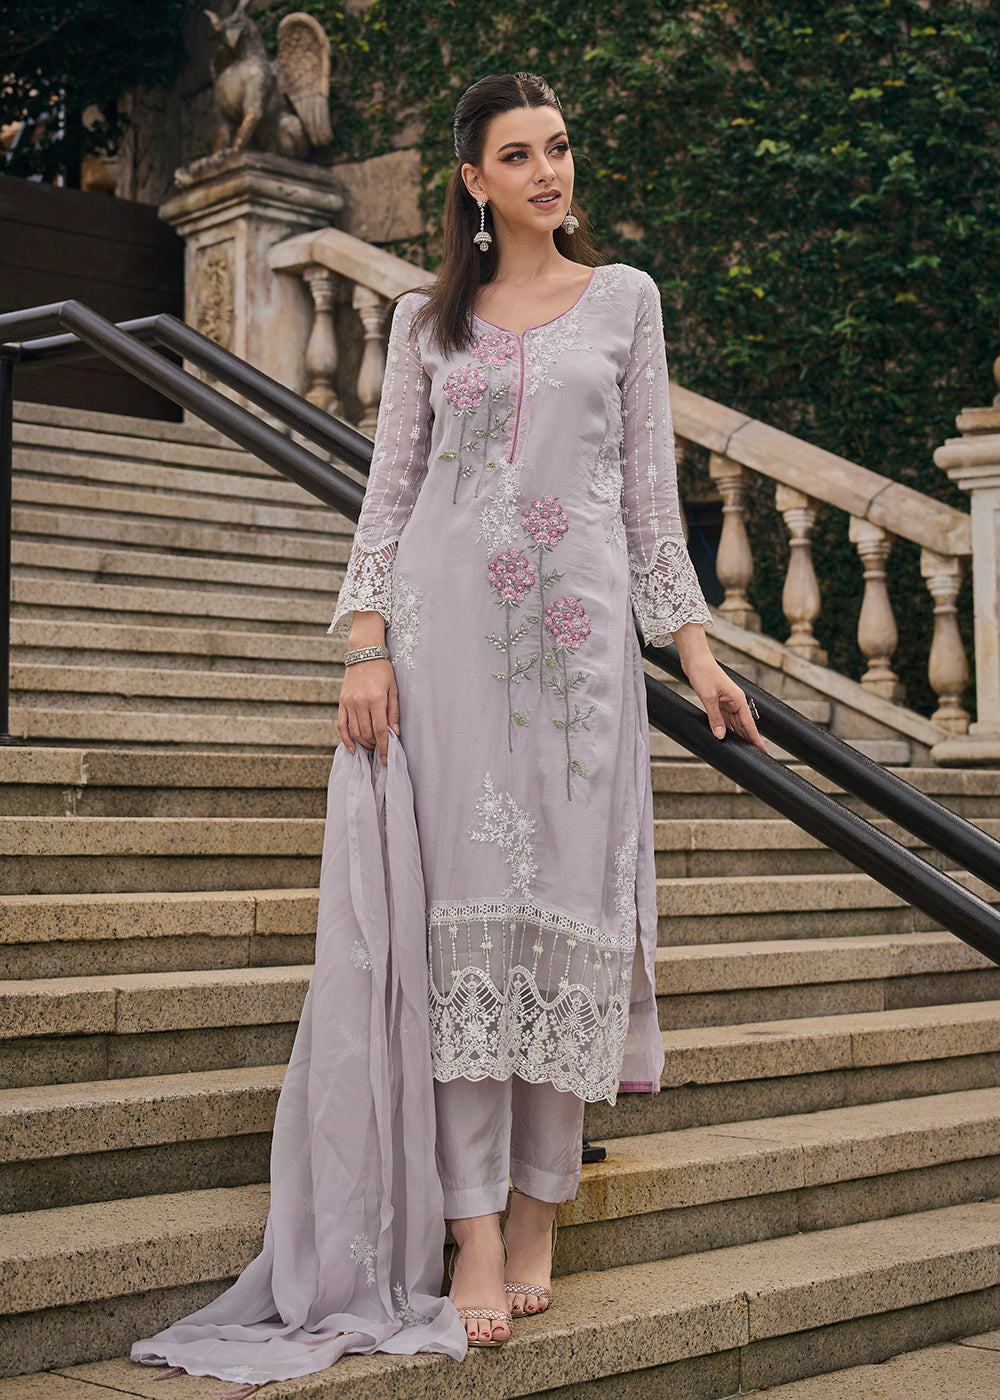 Made to Order Pakistani Wedding Dress Indian Wedding Party Wear Embroidered  Collection Pakistani Dress Shalwar Kameez Suit Eid Style USA 